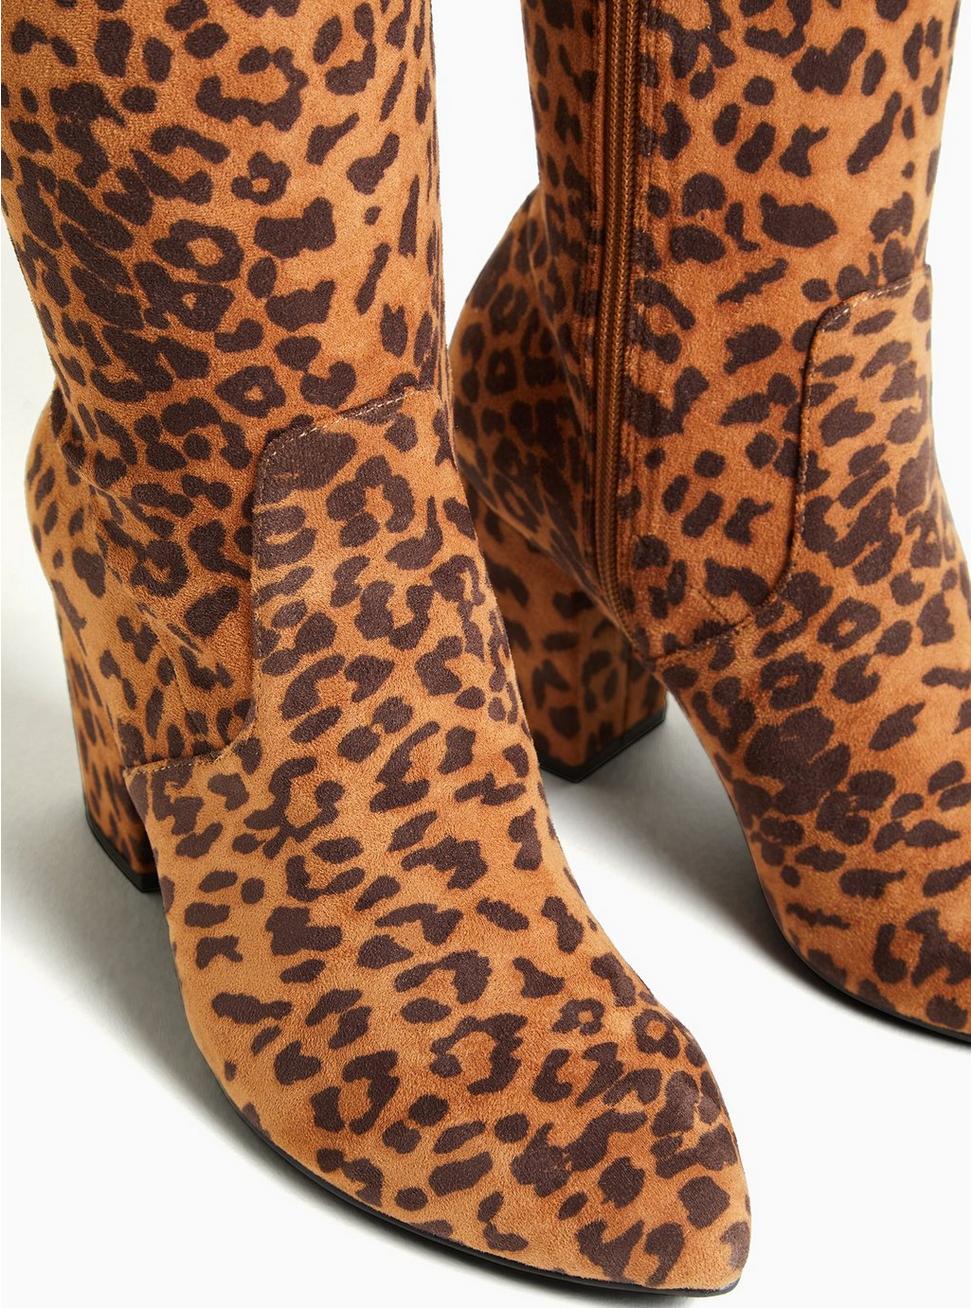 Plus Size Pointed Toe Over-The-Knee Boot (WW), ANIMAL, alternate